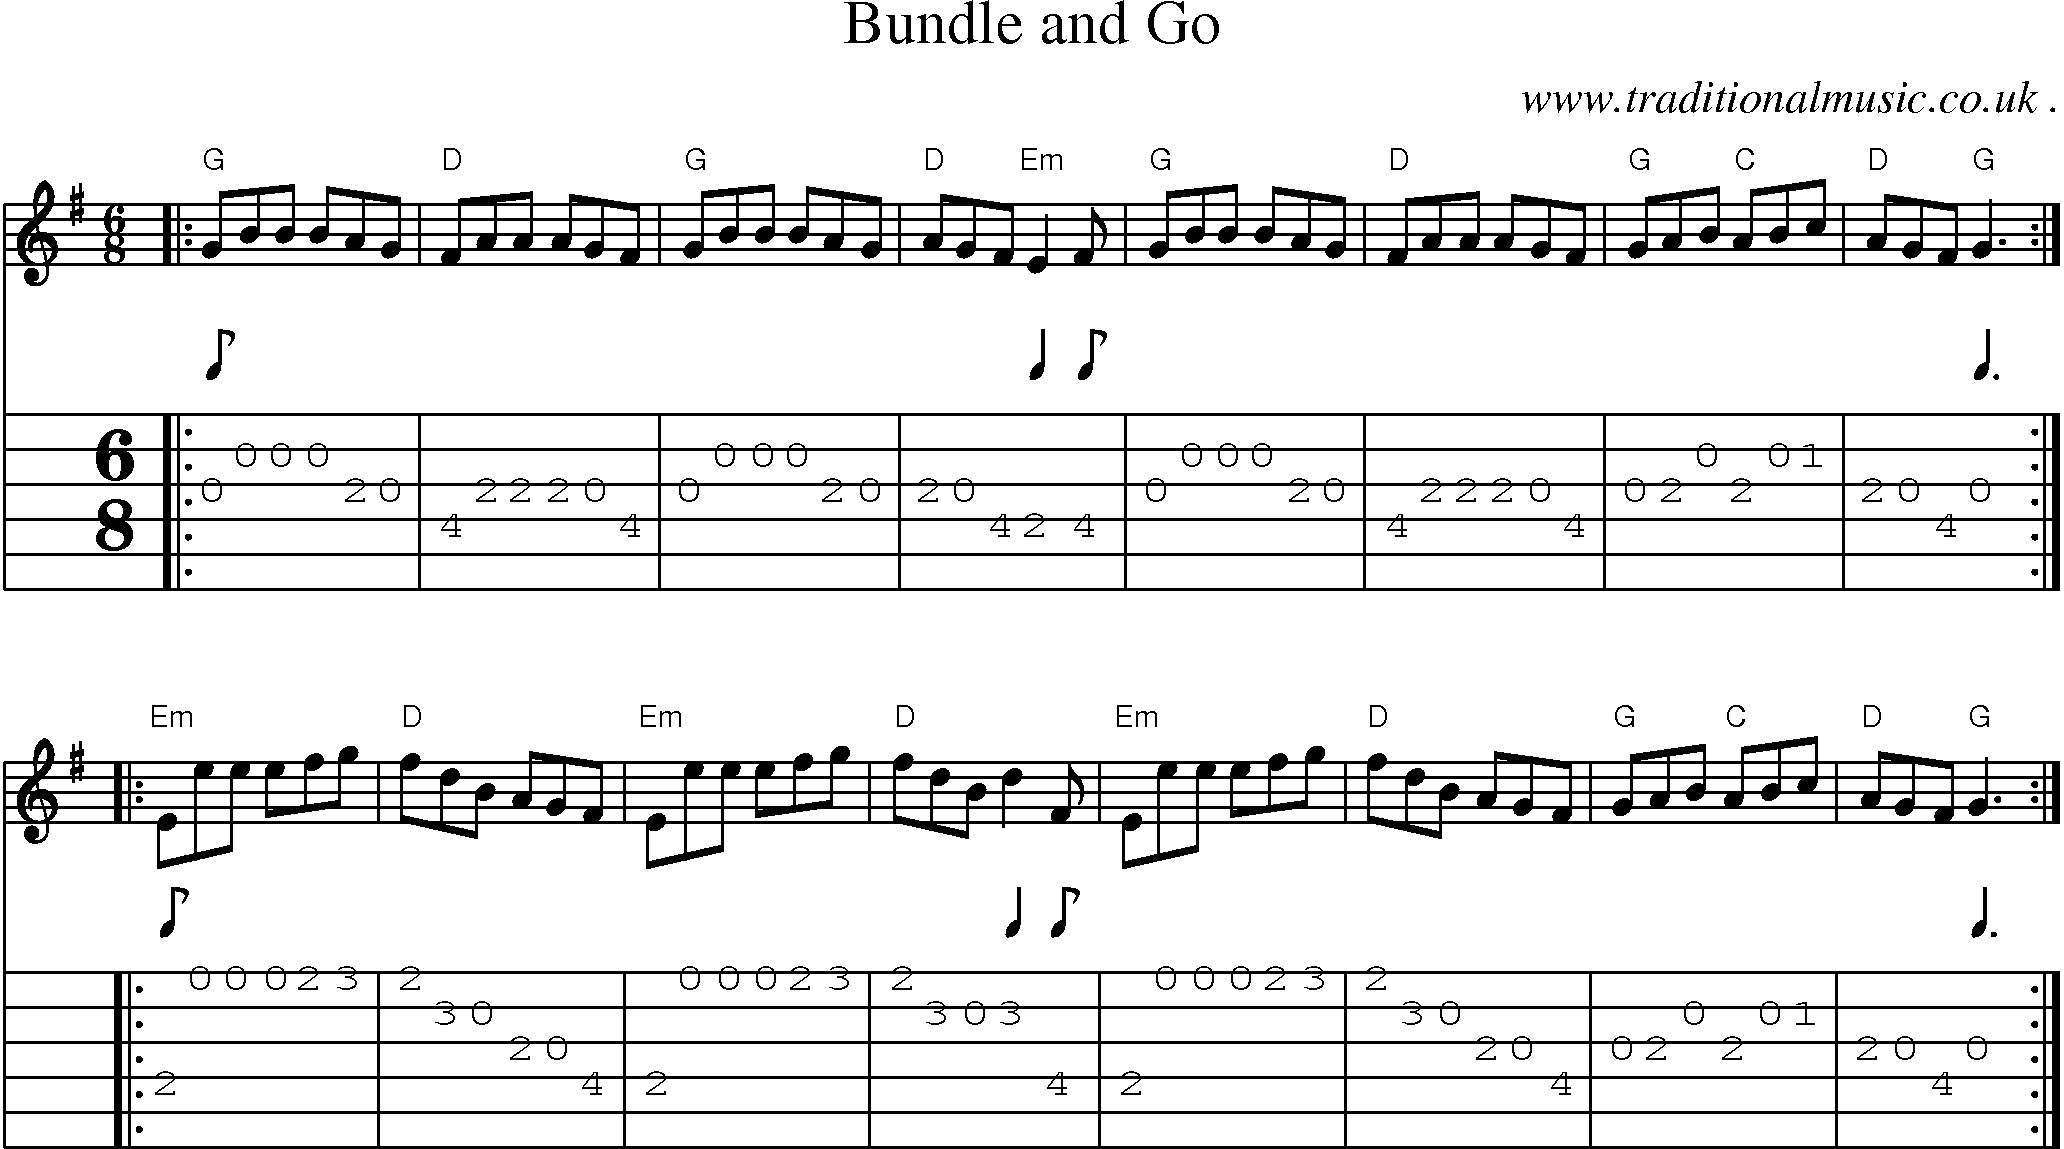 Sheet-music  score, Chords and Guitar Tabs for Bundle And Go